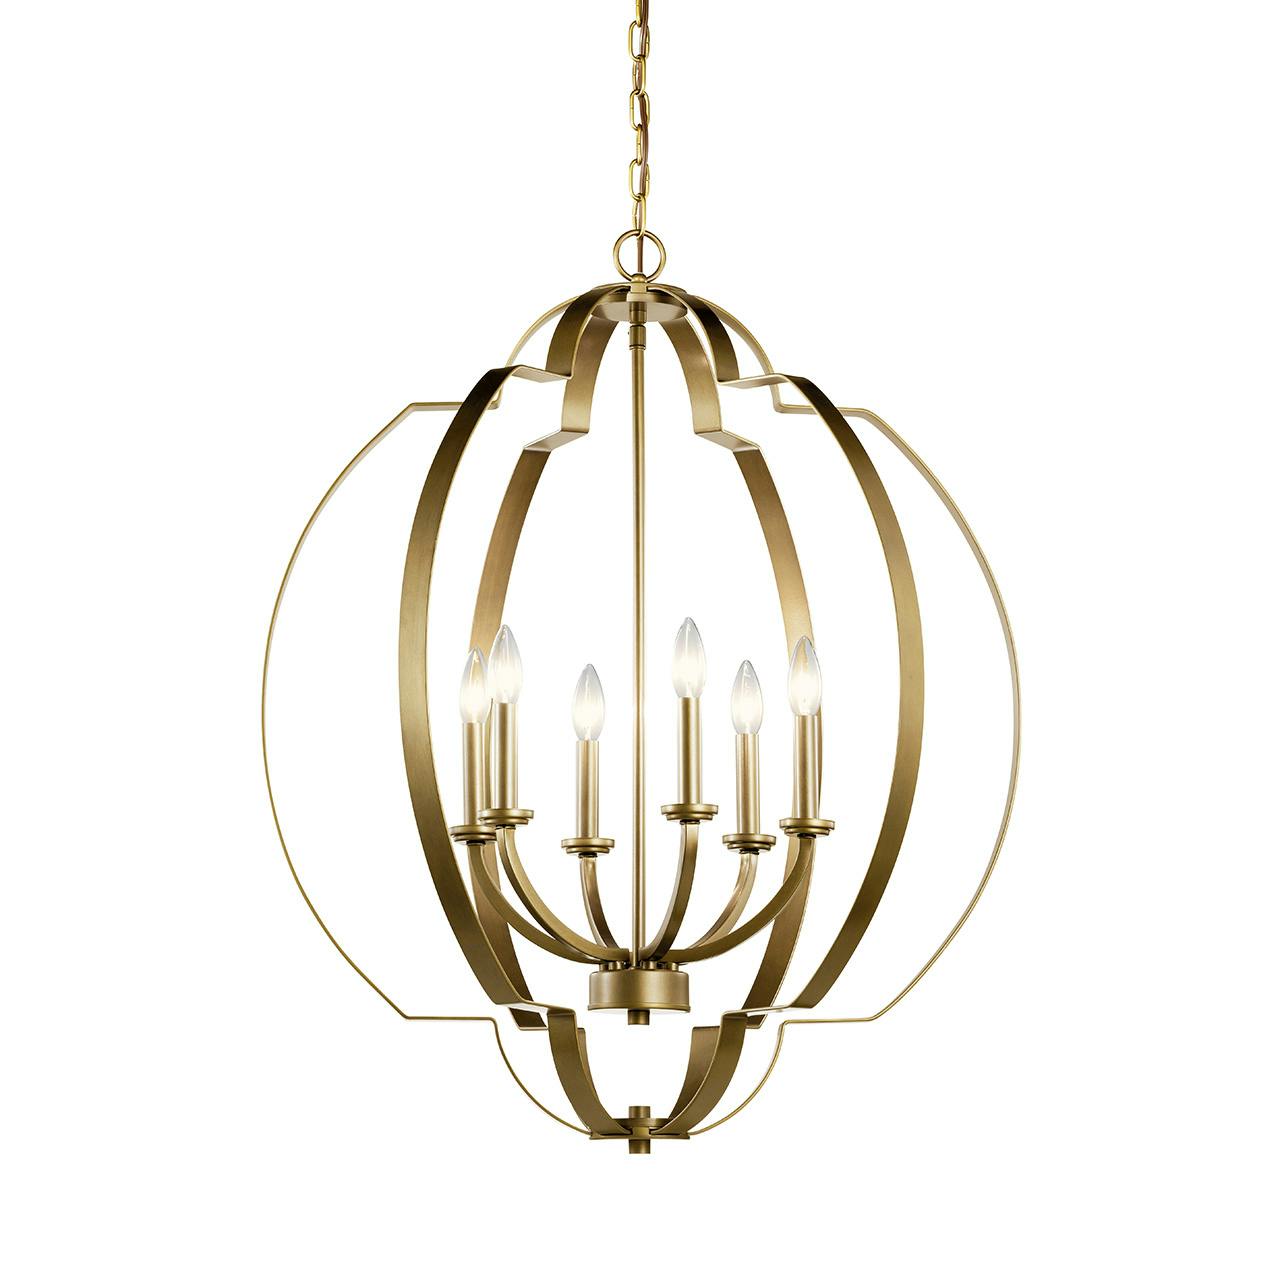 Voleta 6 Light Foyer Chandelier Brass without the canopy on a white background